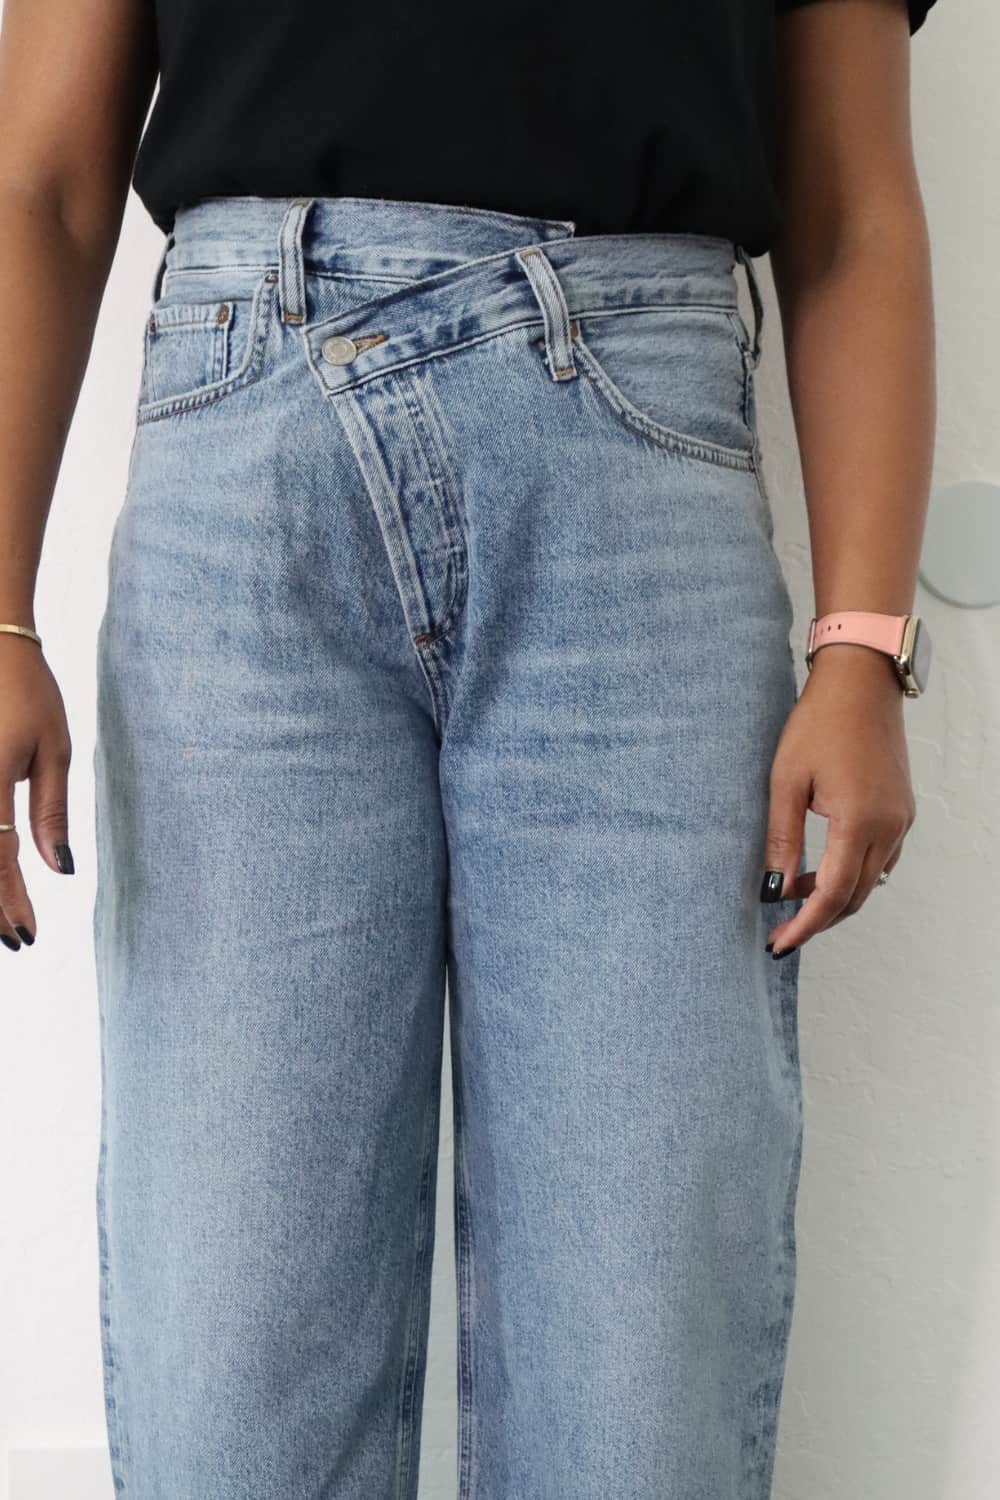 Agolde Criss Cross Straight Leg Jeans opening style